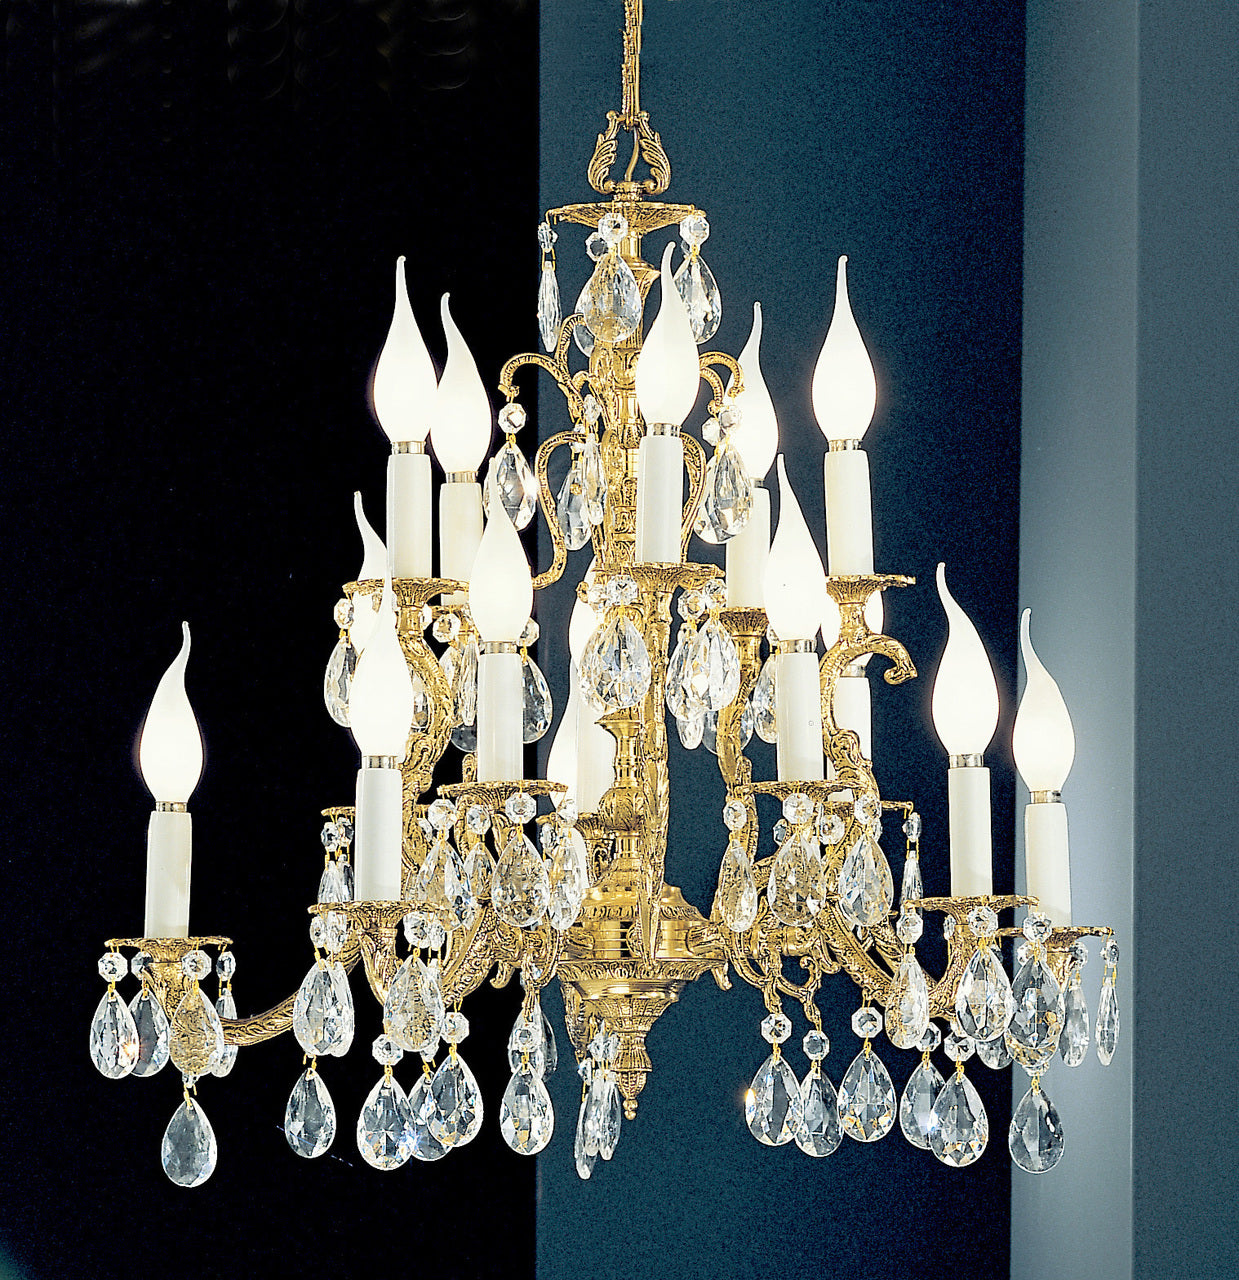 Classic Lighting 5515 OWB I Barcelona Crystal/Cast Brass Chandelier in Olde World Bronze (Imported from Spain)